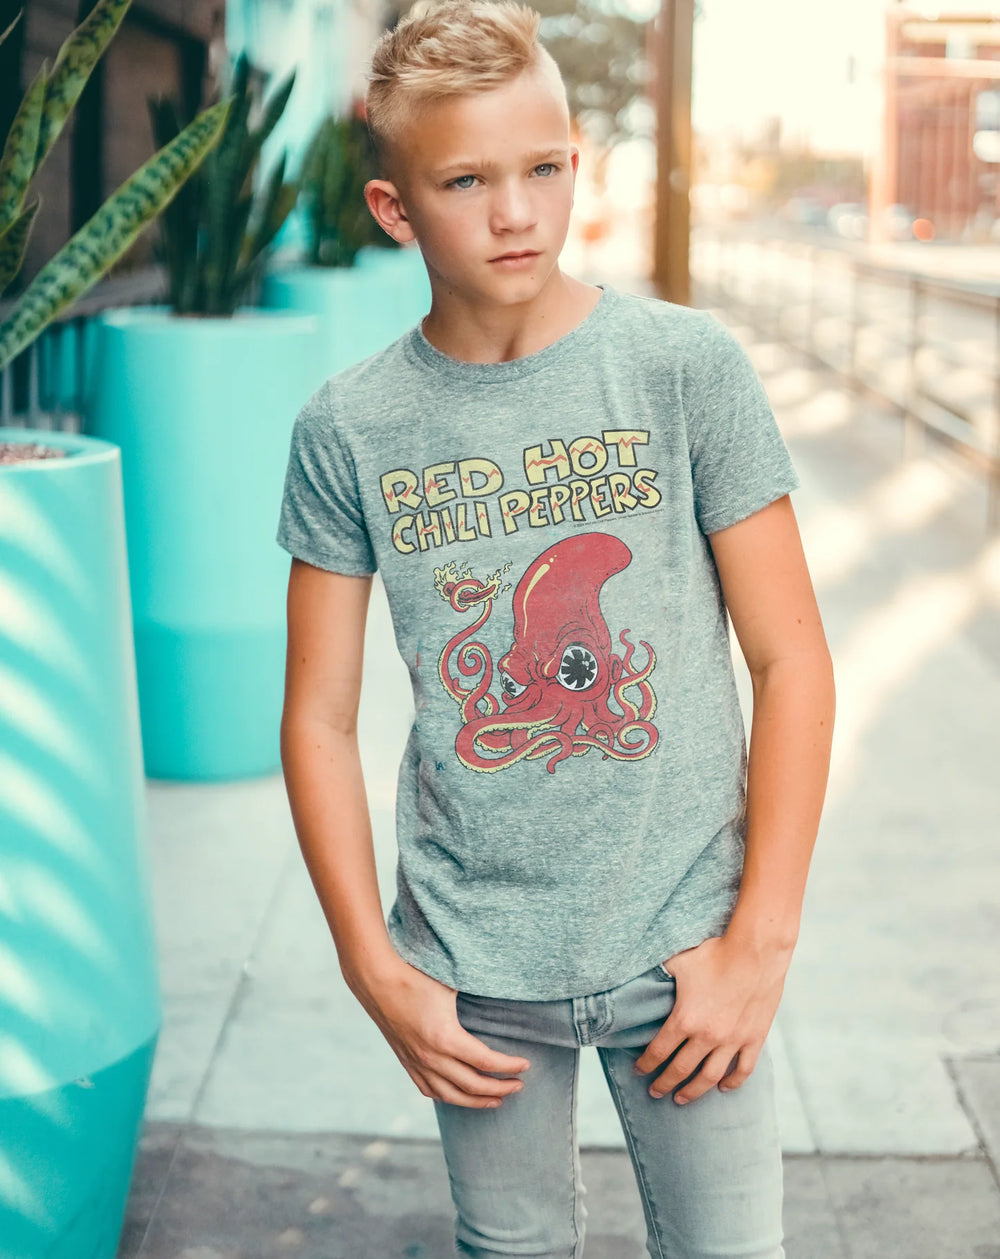 Boy wearing Red Hot Chili Peppers Tee by Rowdy Sprout